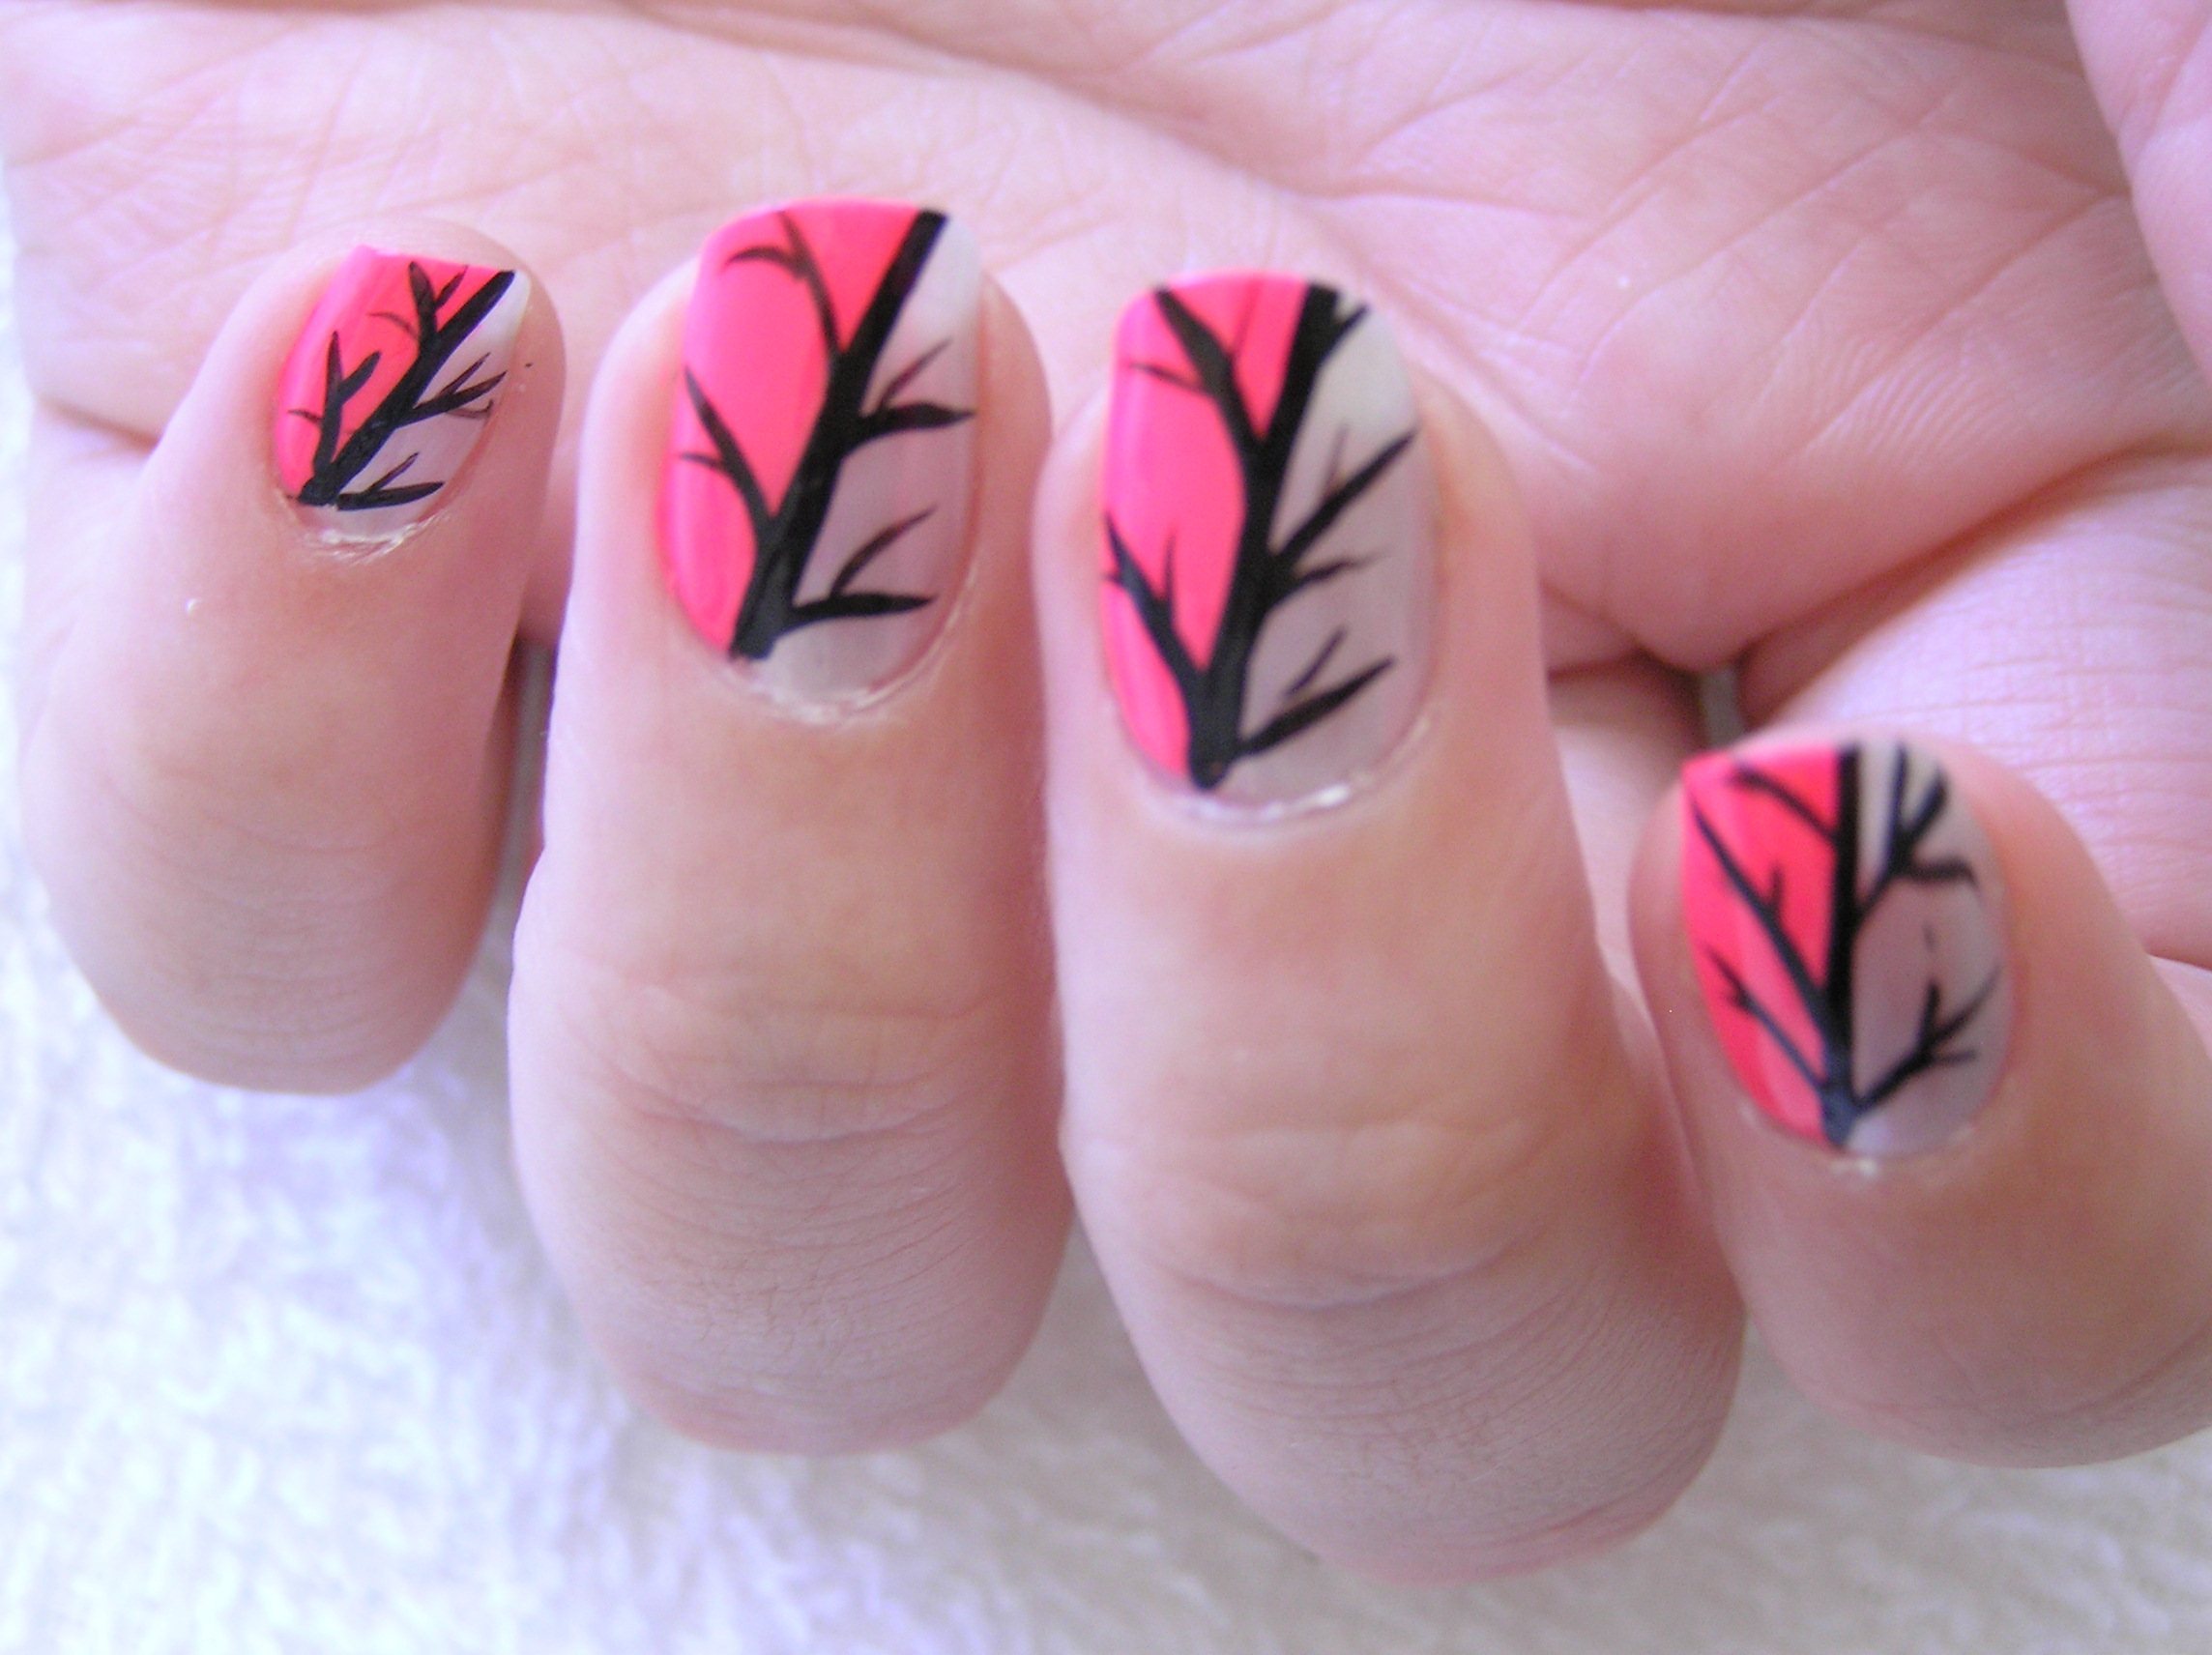 33 Nail Art Designs to Inspire You